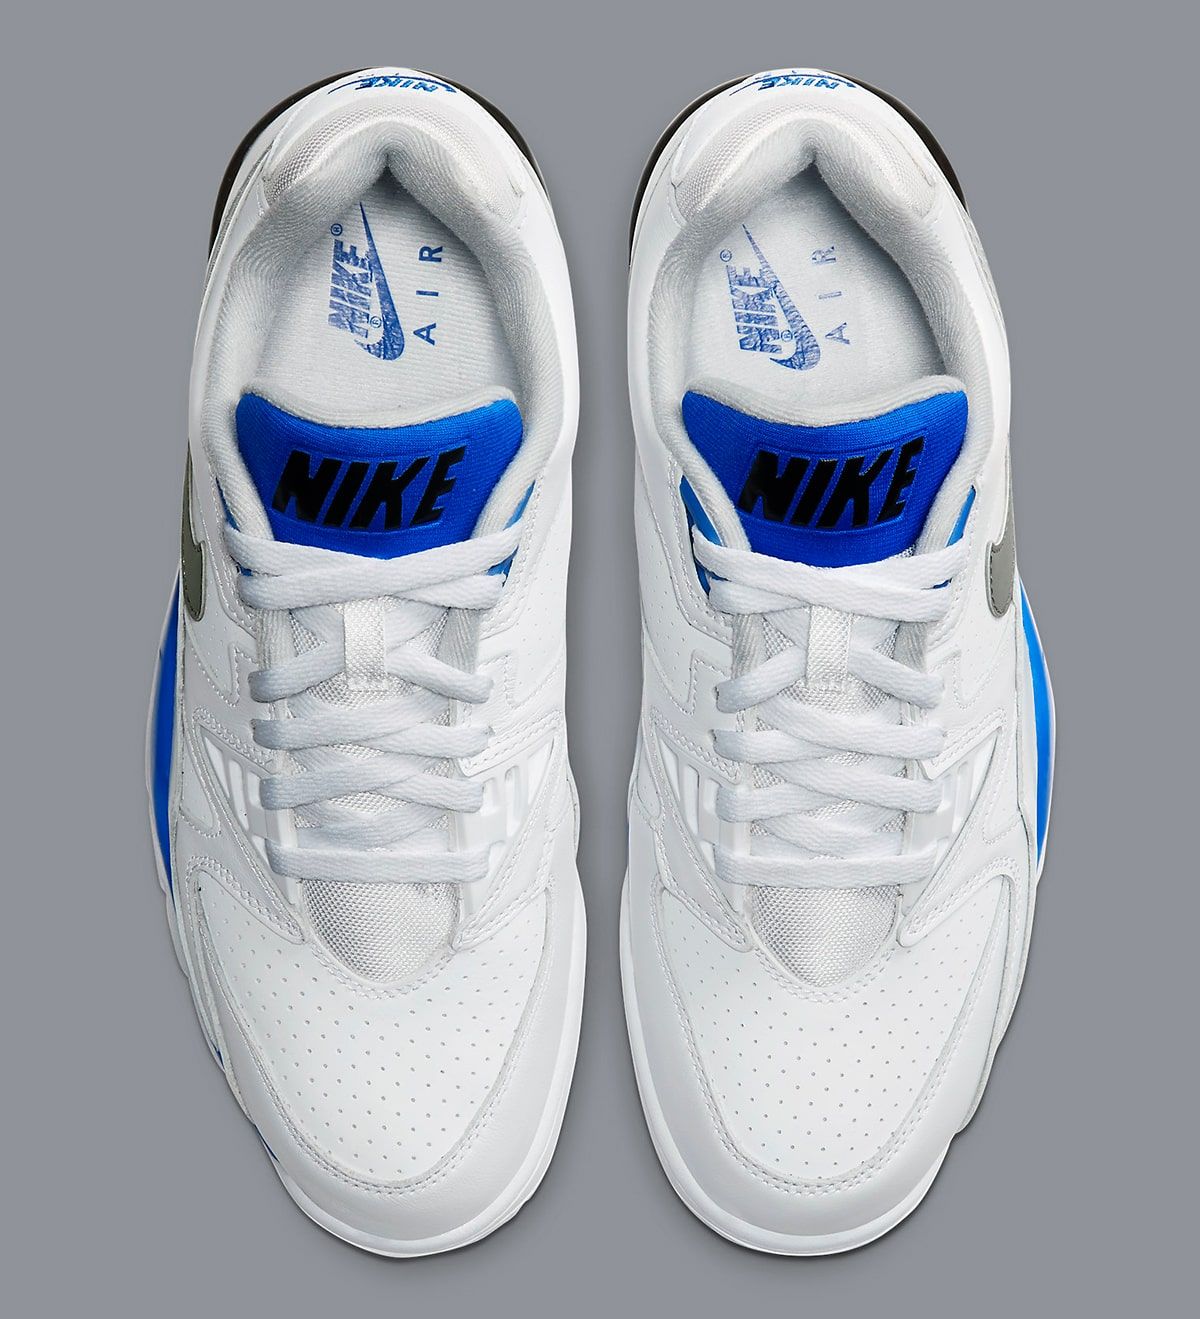 Available Now // Nike Air Cross Trainer 3 Low 